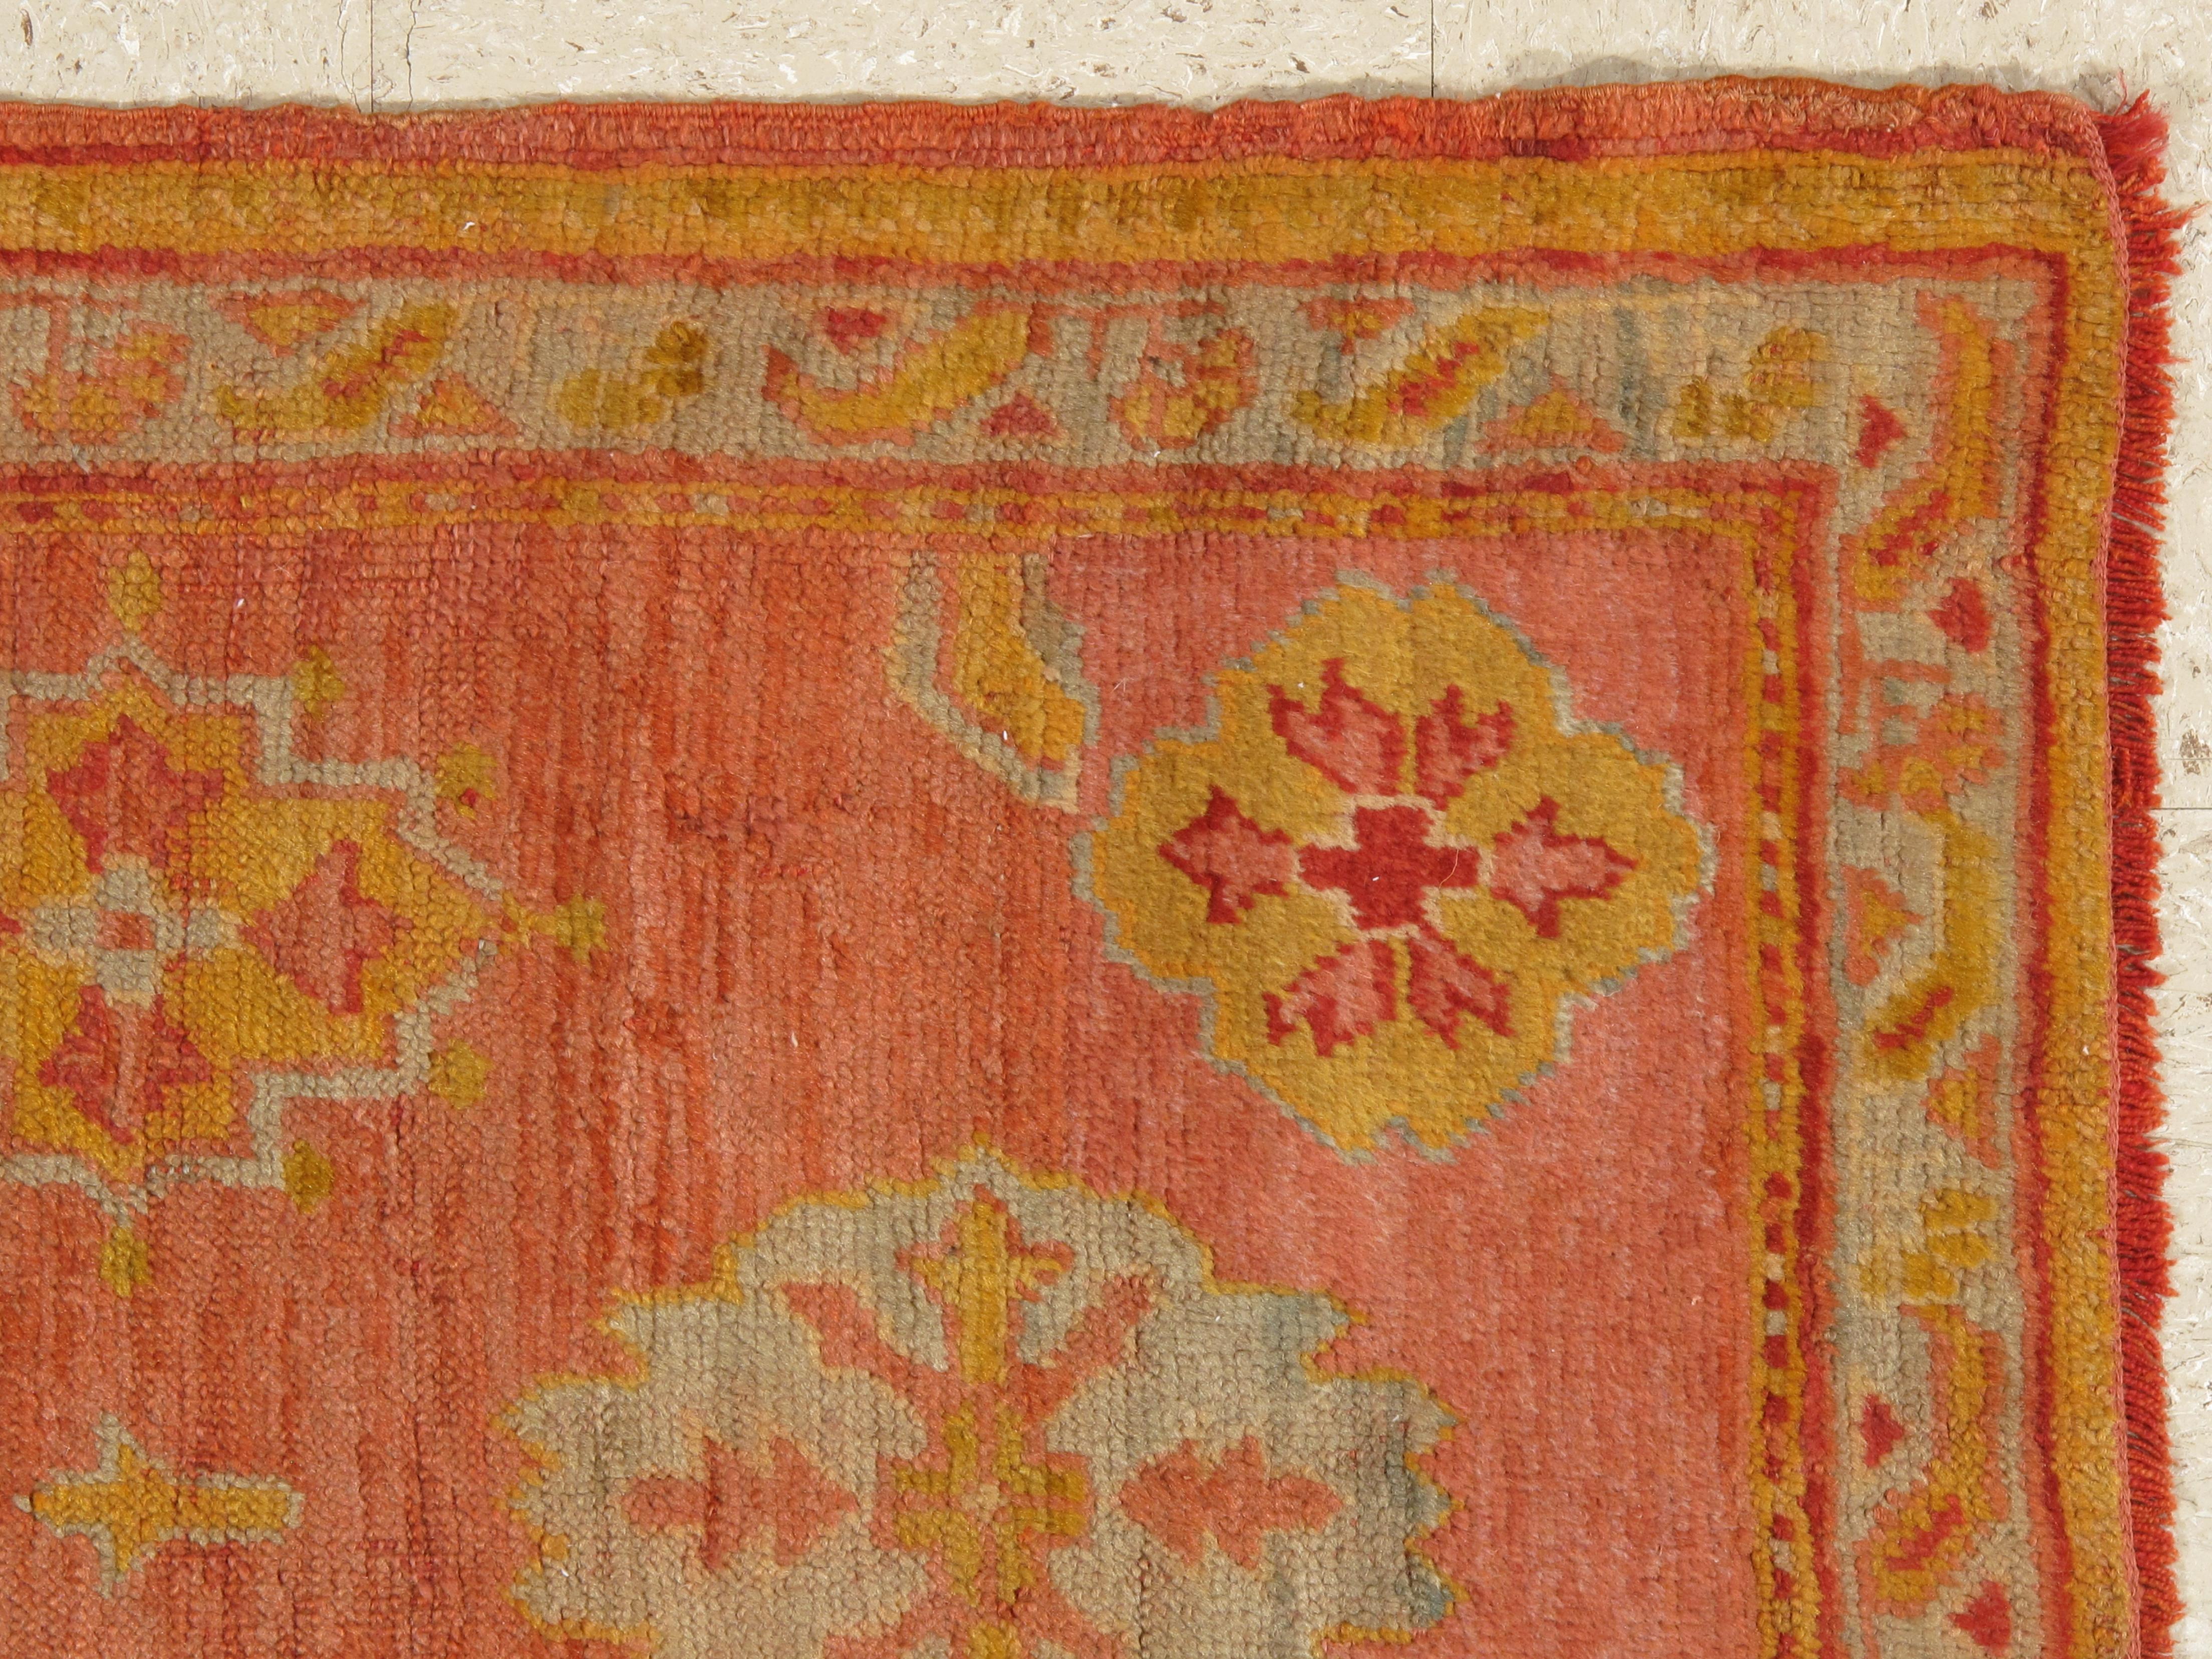 West Anatolia is one of the largest weaving regions in Turkey. Since the 15th century, Turkish rugs have always been on top of the list for having fine Oriental rugs.
Oushak rugs such as this, are desirable in today’s highly decorative market. A